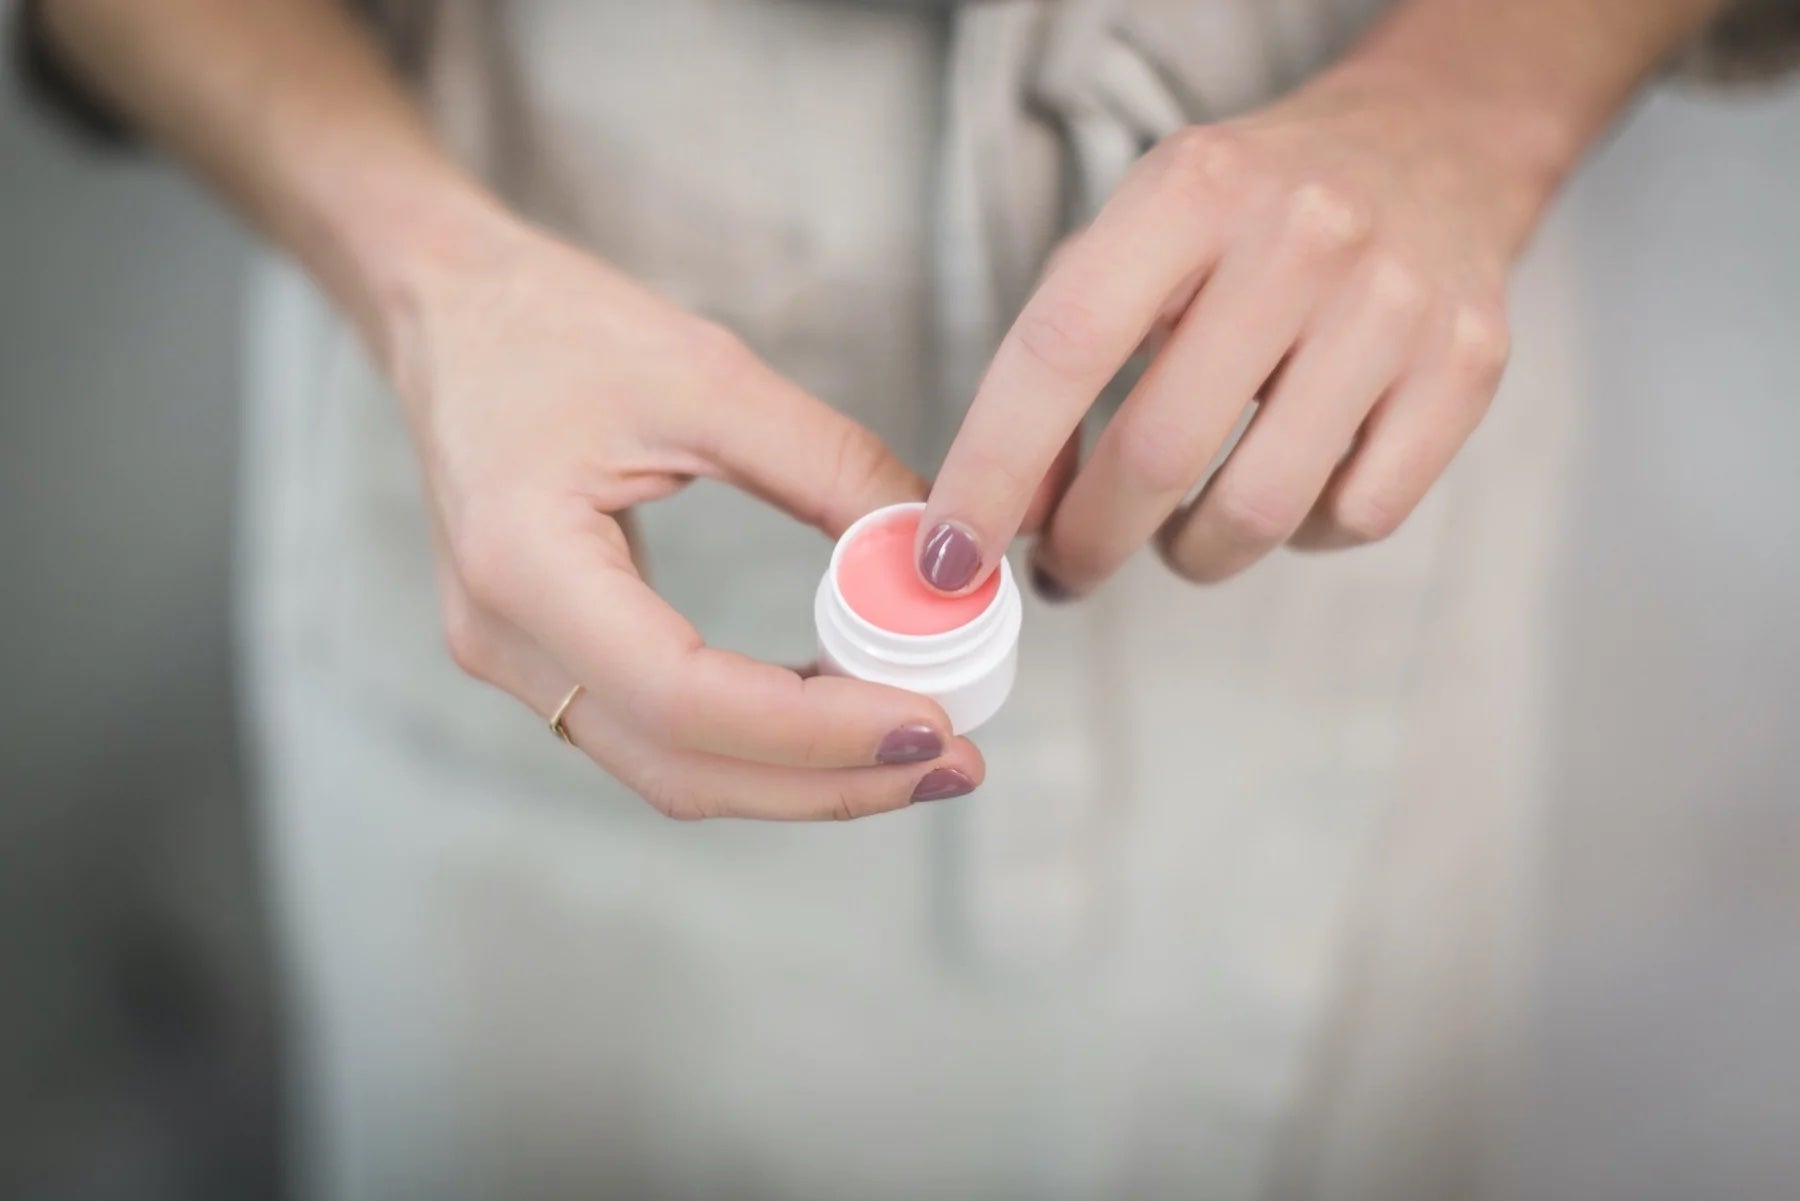 A person sticks their finger in a pot of lipbalm